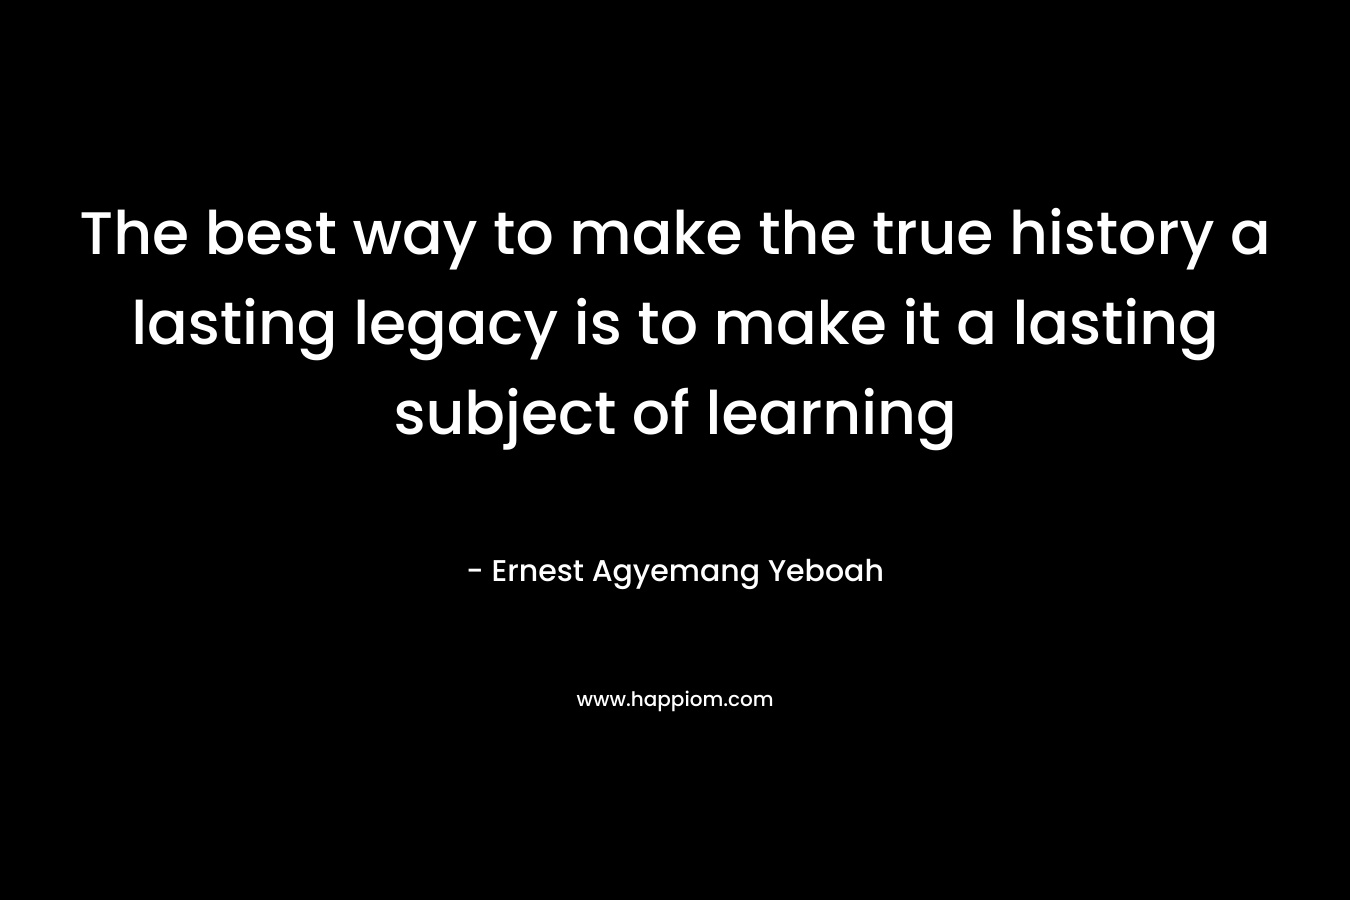 The best way to make the true history a lasting legacy is to make it a lasting subject of learning